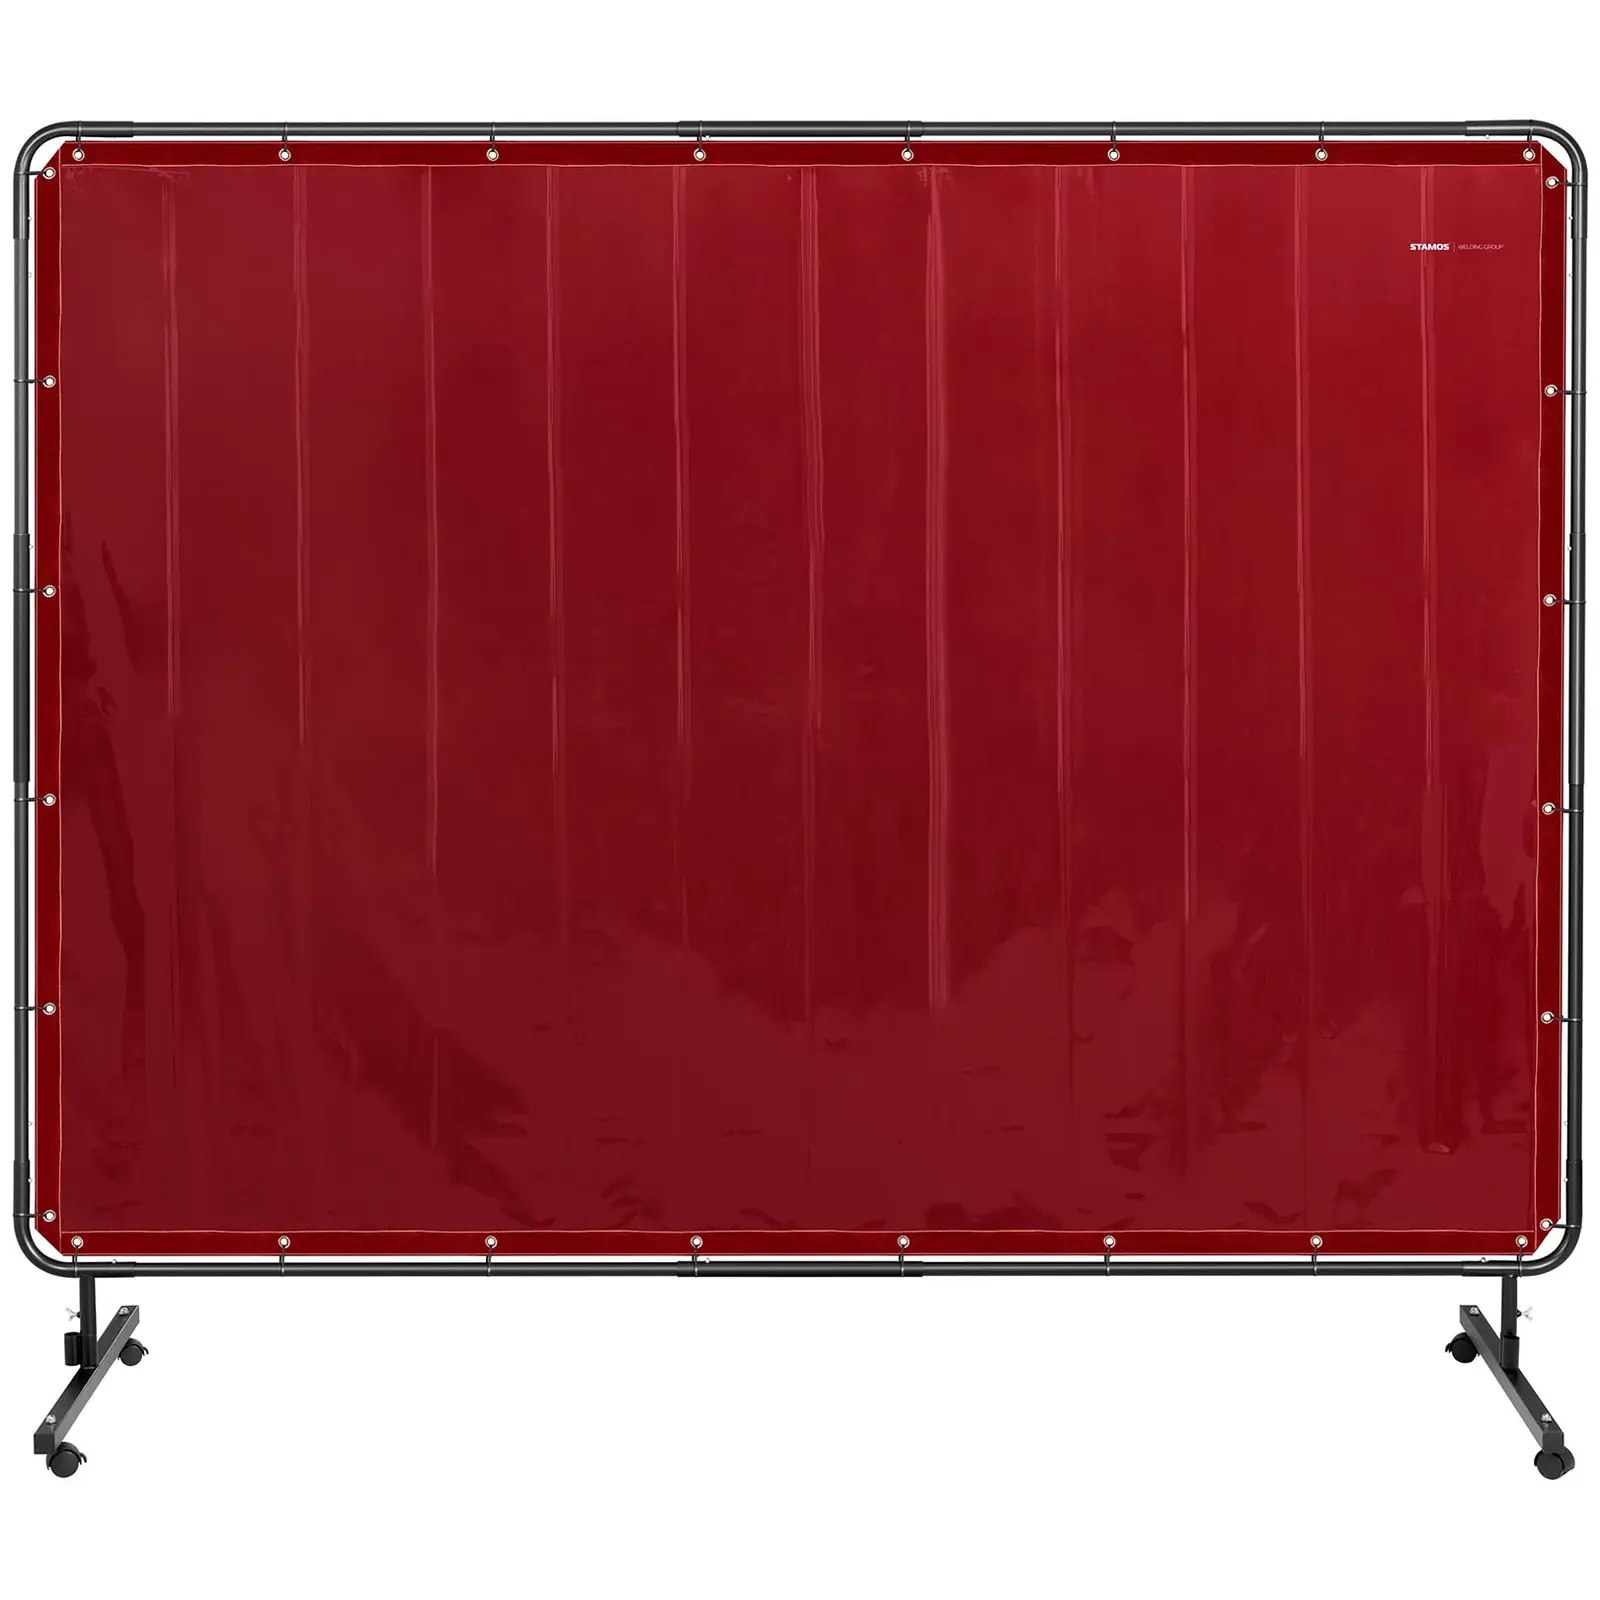 Welding Screen - with frame - 240 x 180 cm